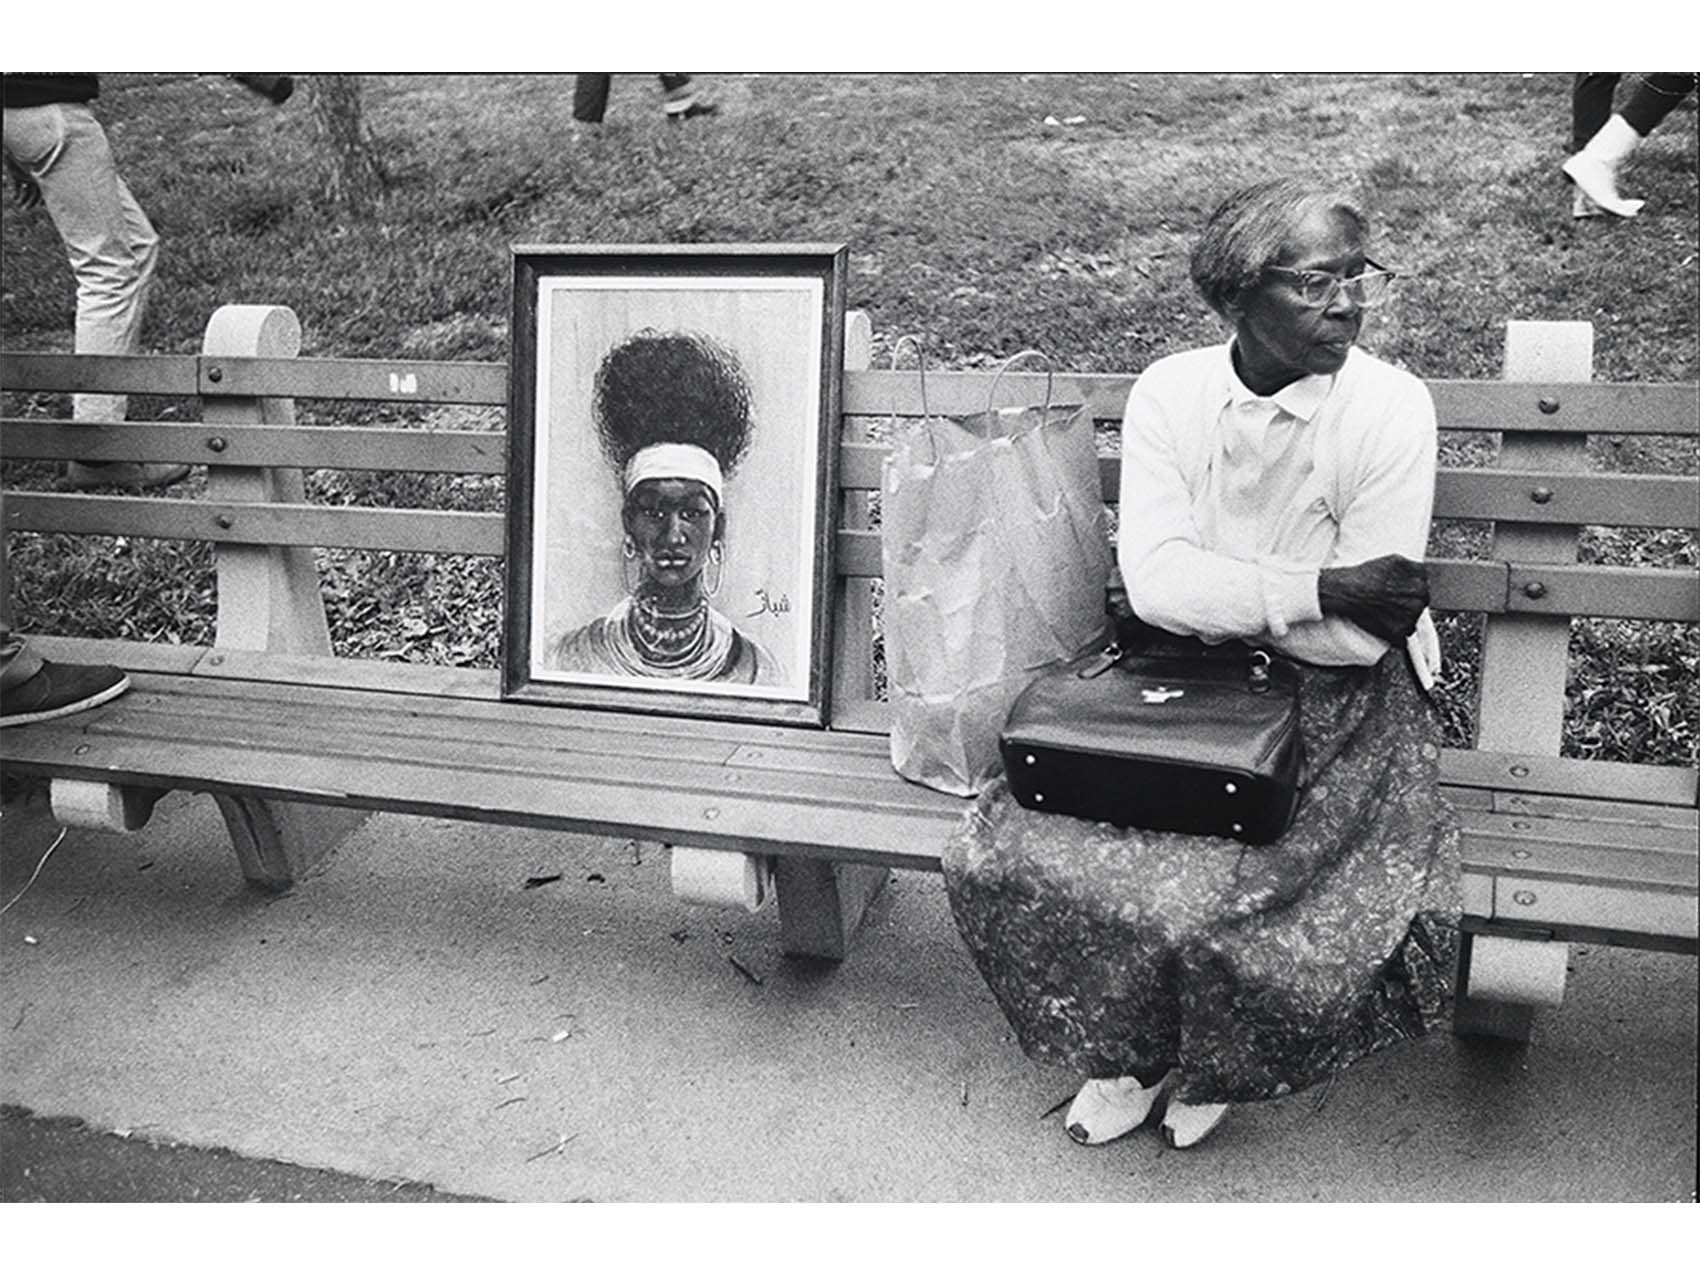 a black woman sitting on a bench wearing a blouse, skirt, and glasses with a purse on her lap and a bag on her right; also on the bench is a framed bust painting of a black person with extensive necklaces and large hoop earings, wide head band and high teased hair